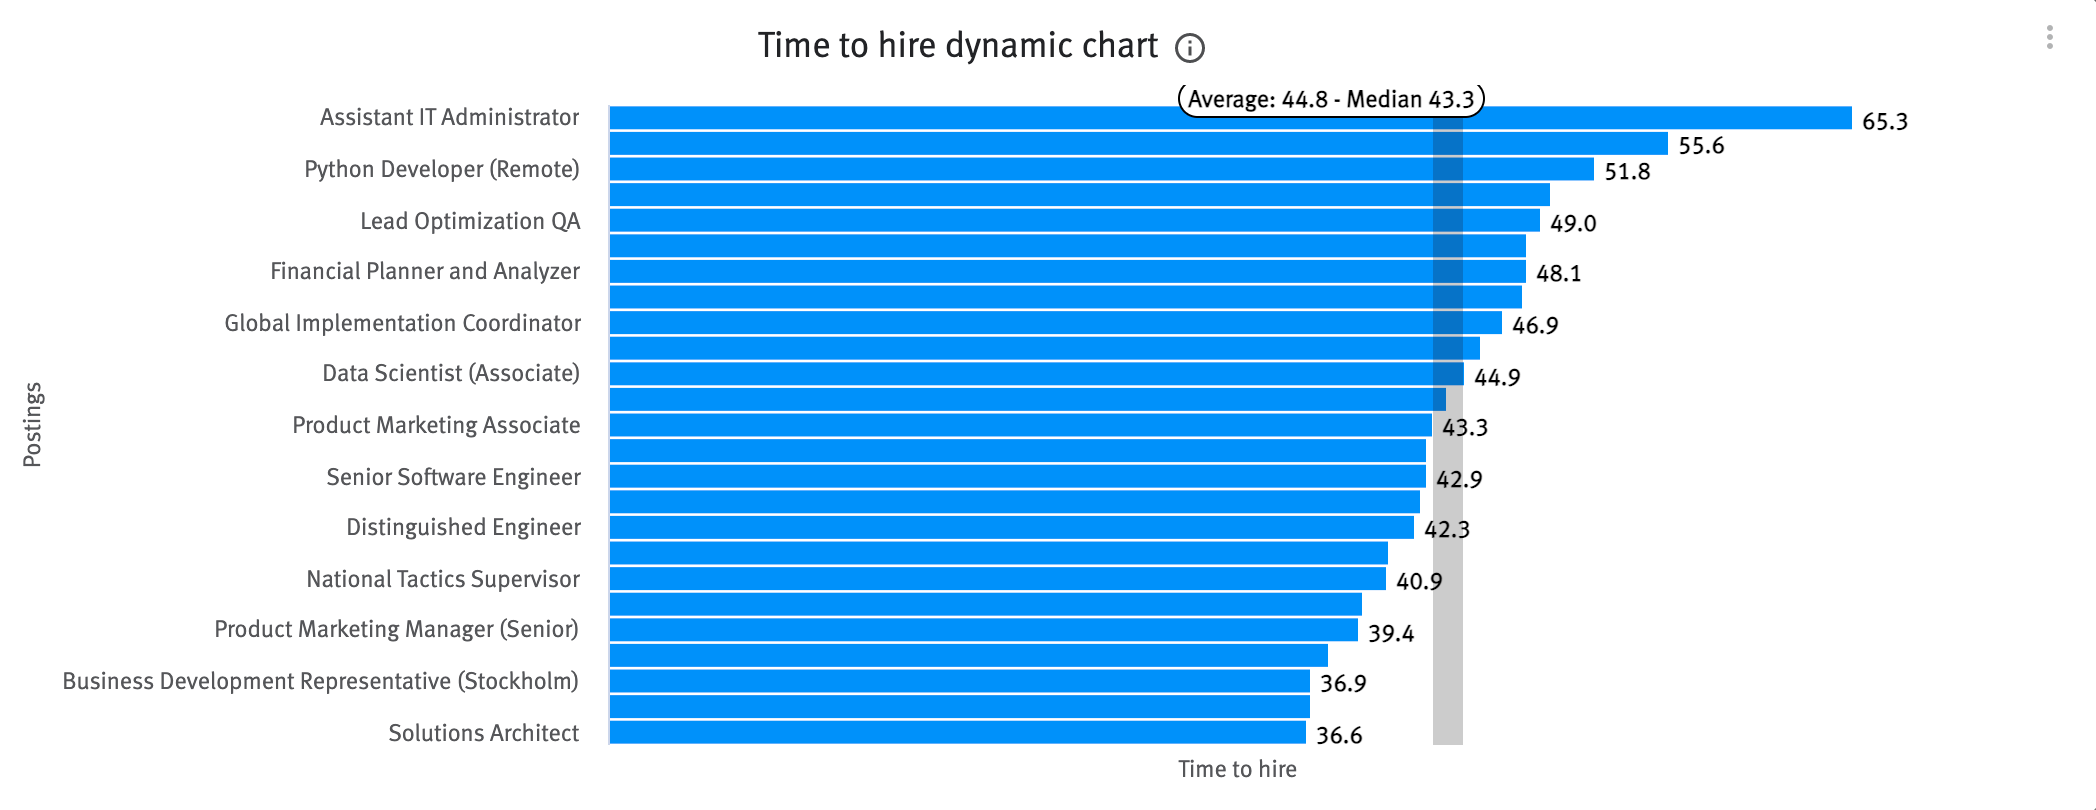 Time to hire dynamic chart